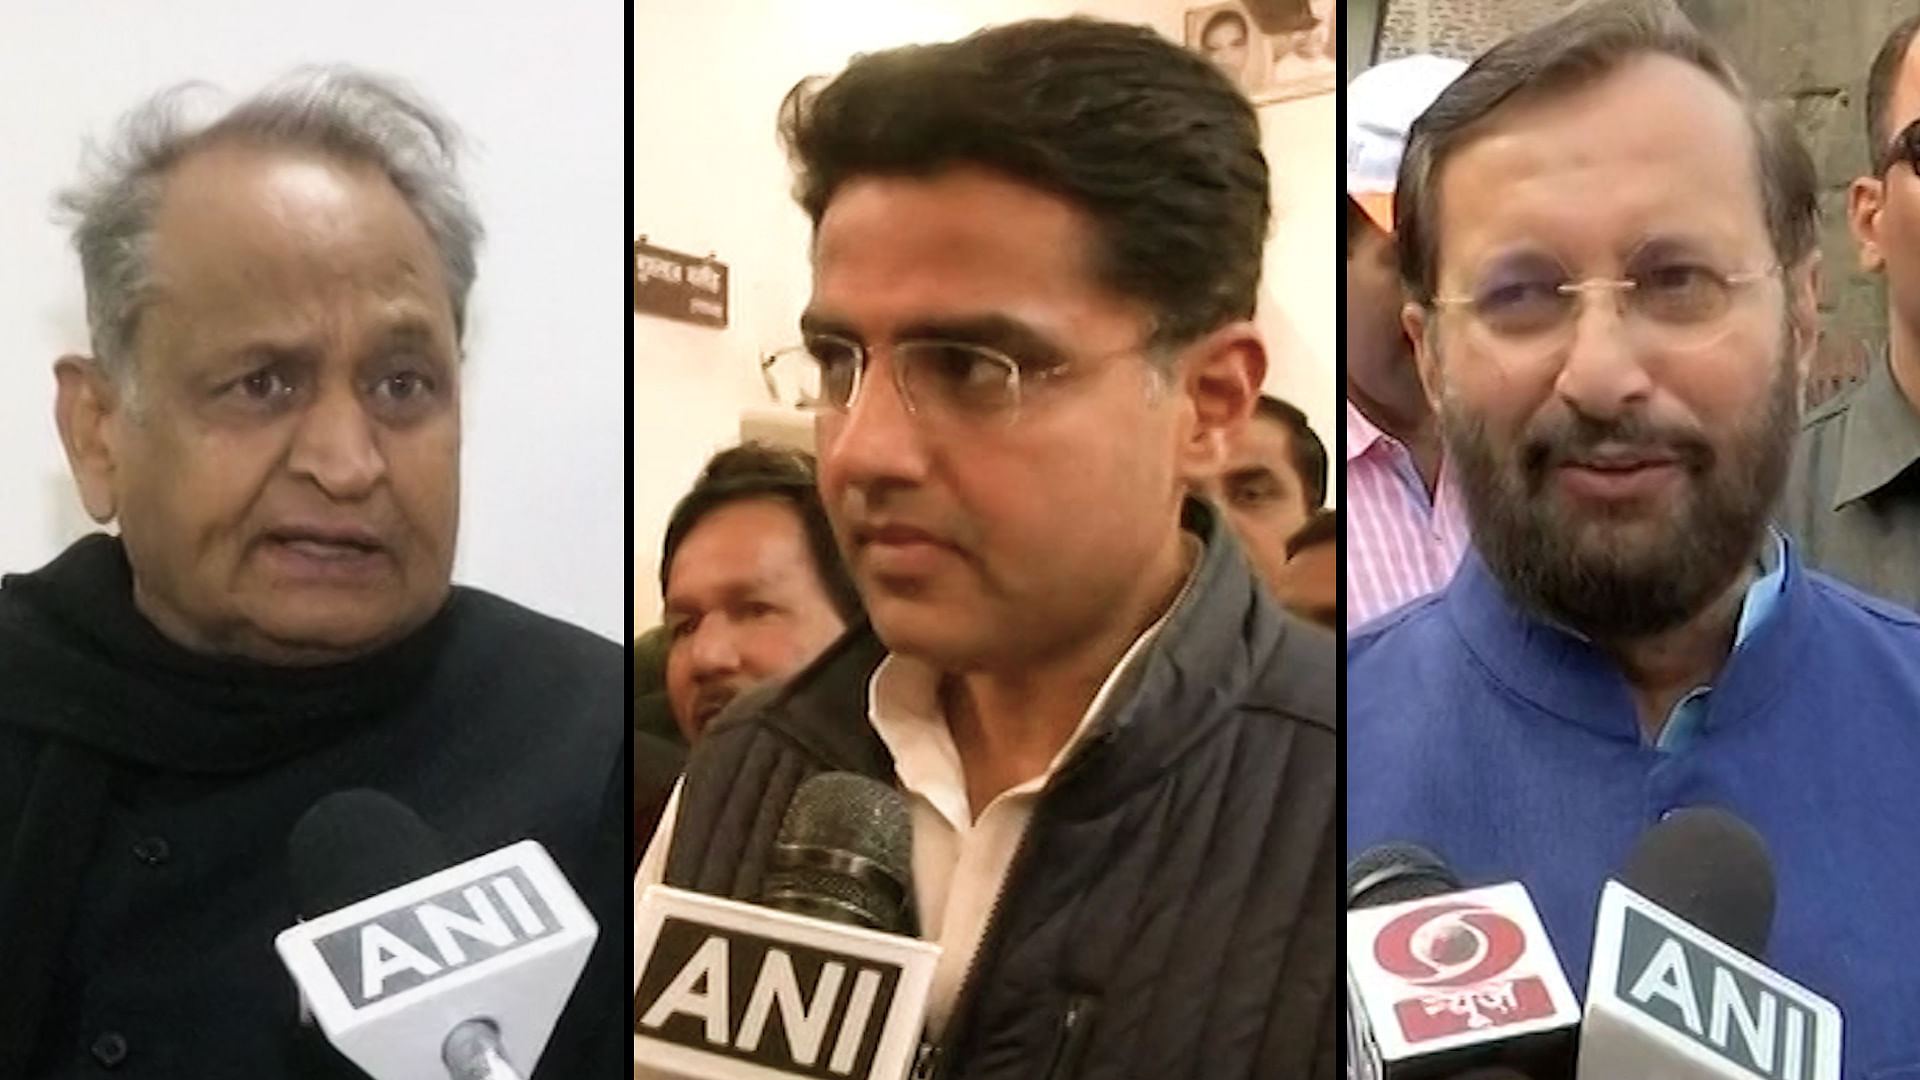 Congress’ Ashok Gehlot (Left) and Sachin Pilot (Centre) rejoiced at the exit poll projections while Union Minister Prakash Javadekar (Right) said that he would rather wait for “exact poll” results on 11 December.